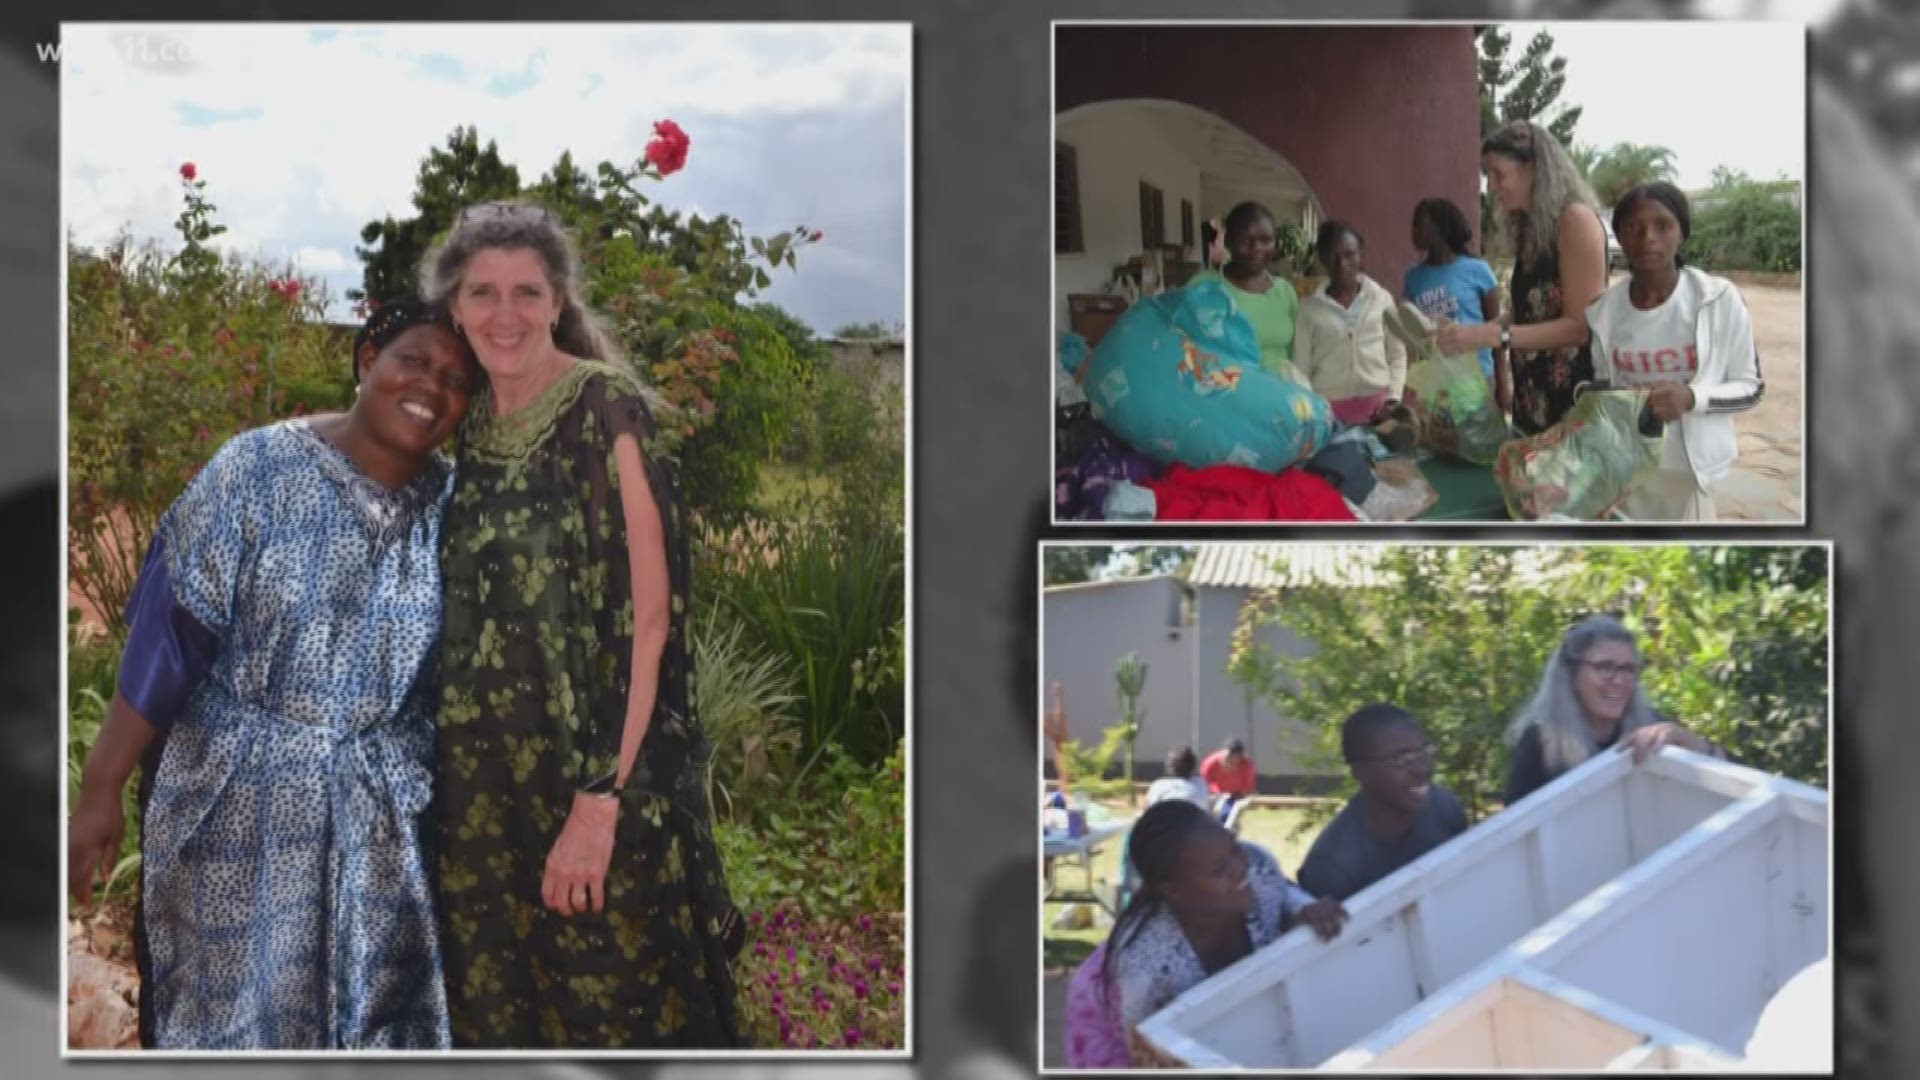 A local woman who used to live in Zambia has continued to help people that live there 'one purse at a time.'